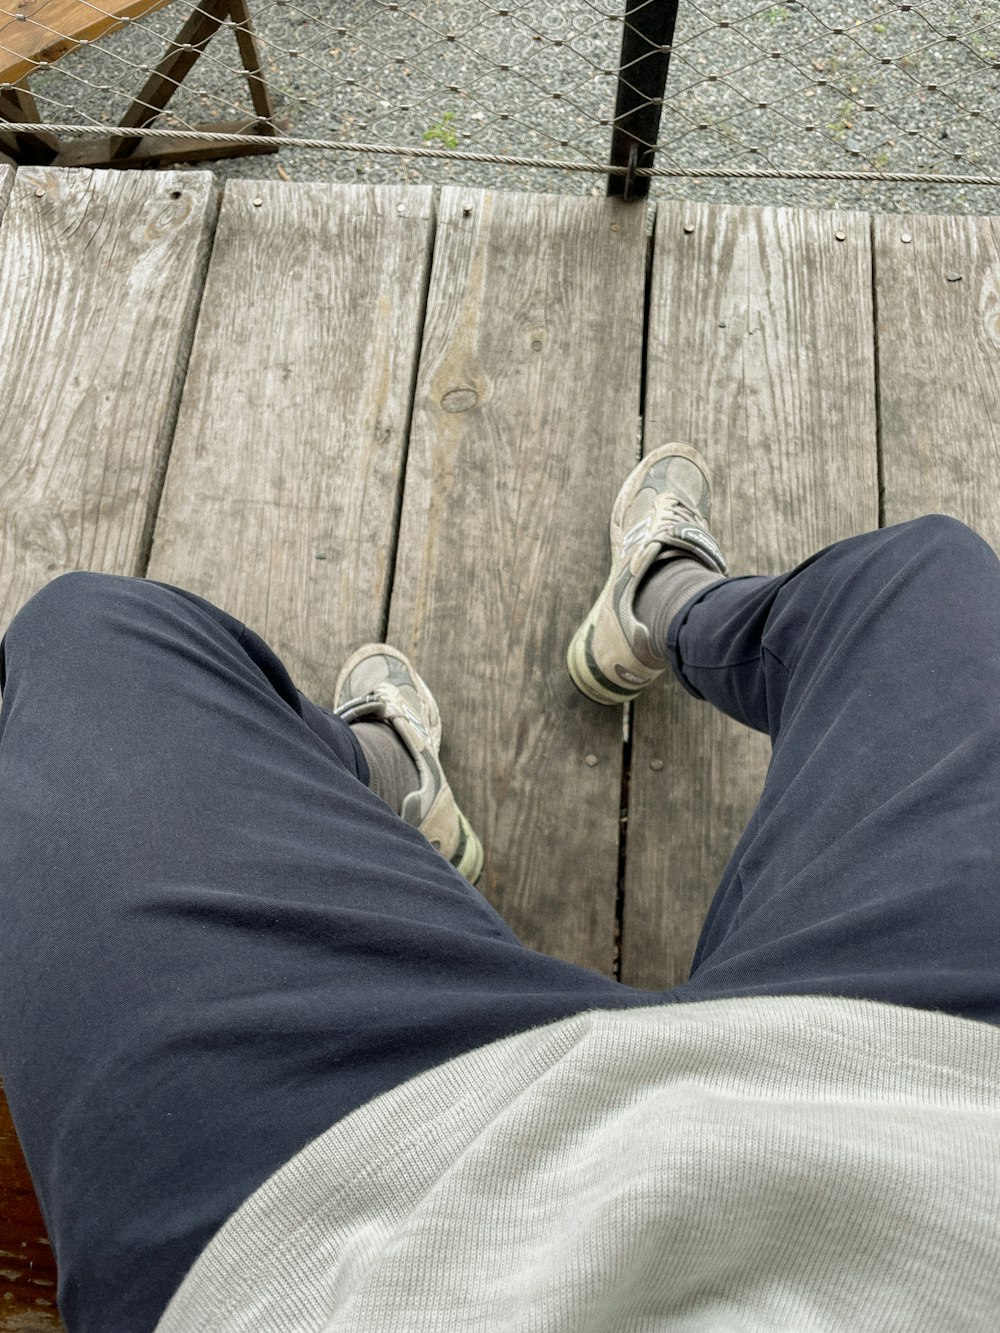 A person standing on a wooden platform with their feet up photo – Free Grey  Image on Unsplash